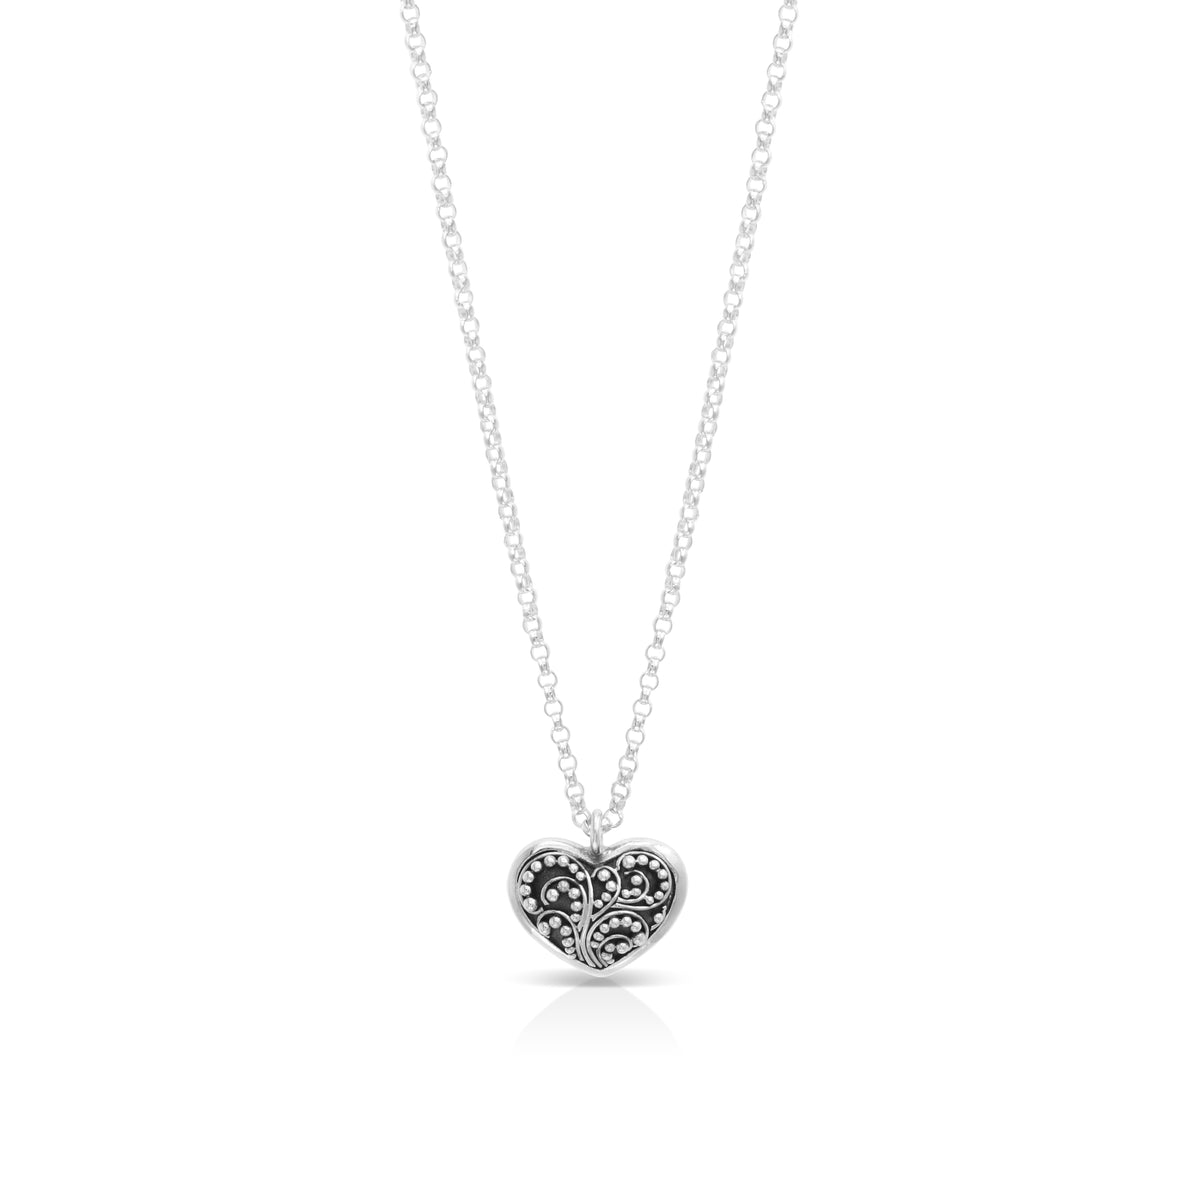 Small Classic Granulated Heart-Shaped Pendant Necklace. Pendant 12mm x 13mm